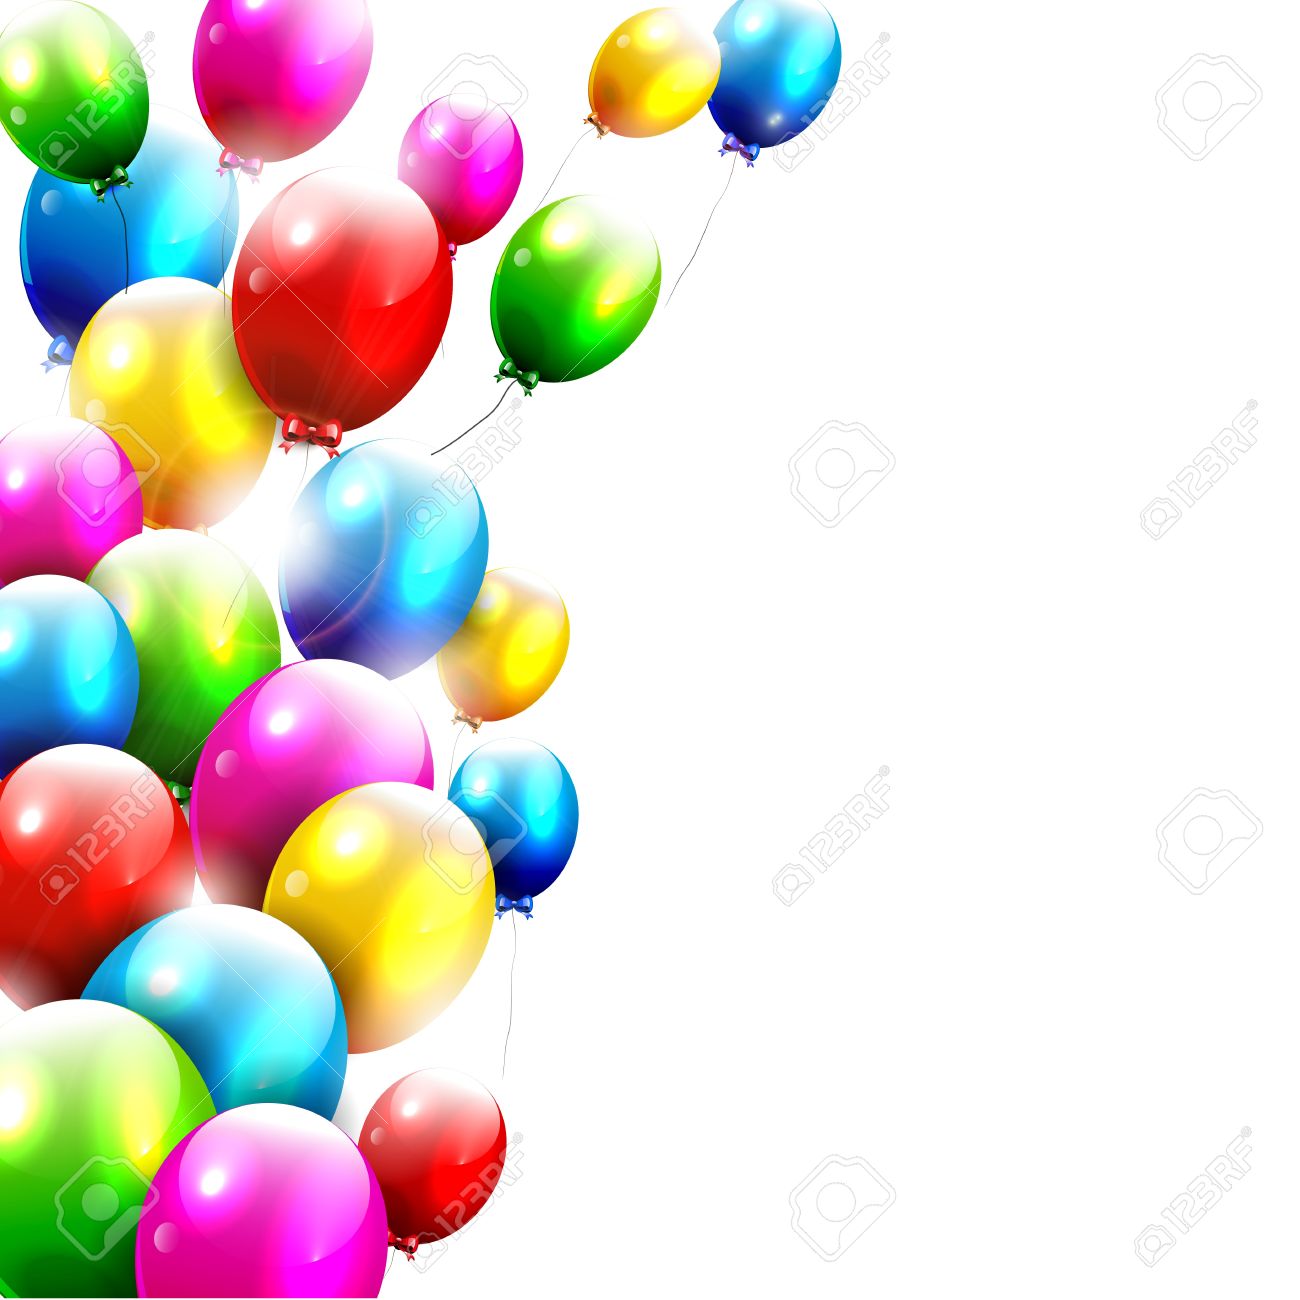 Real Birthday Balloons Backgrounds The Art Mad Wallpapers